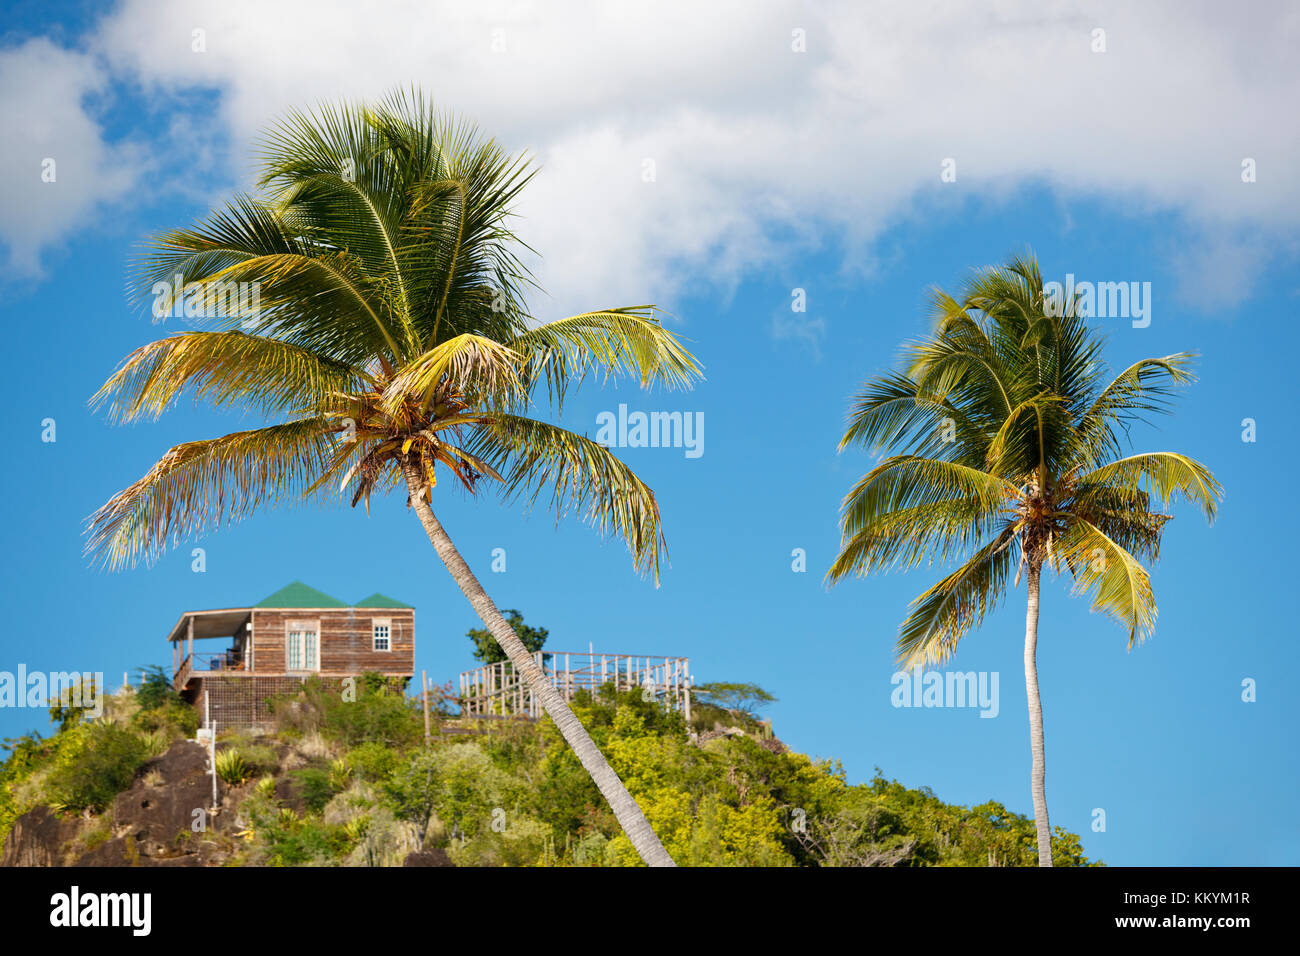 Coconut palm trees in front of blue sky and a bungalow on top of a hill. Stock Photo